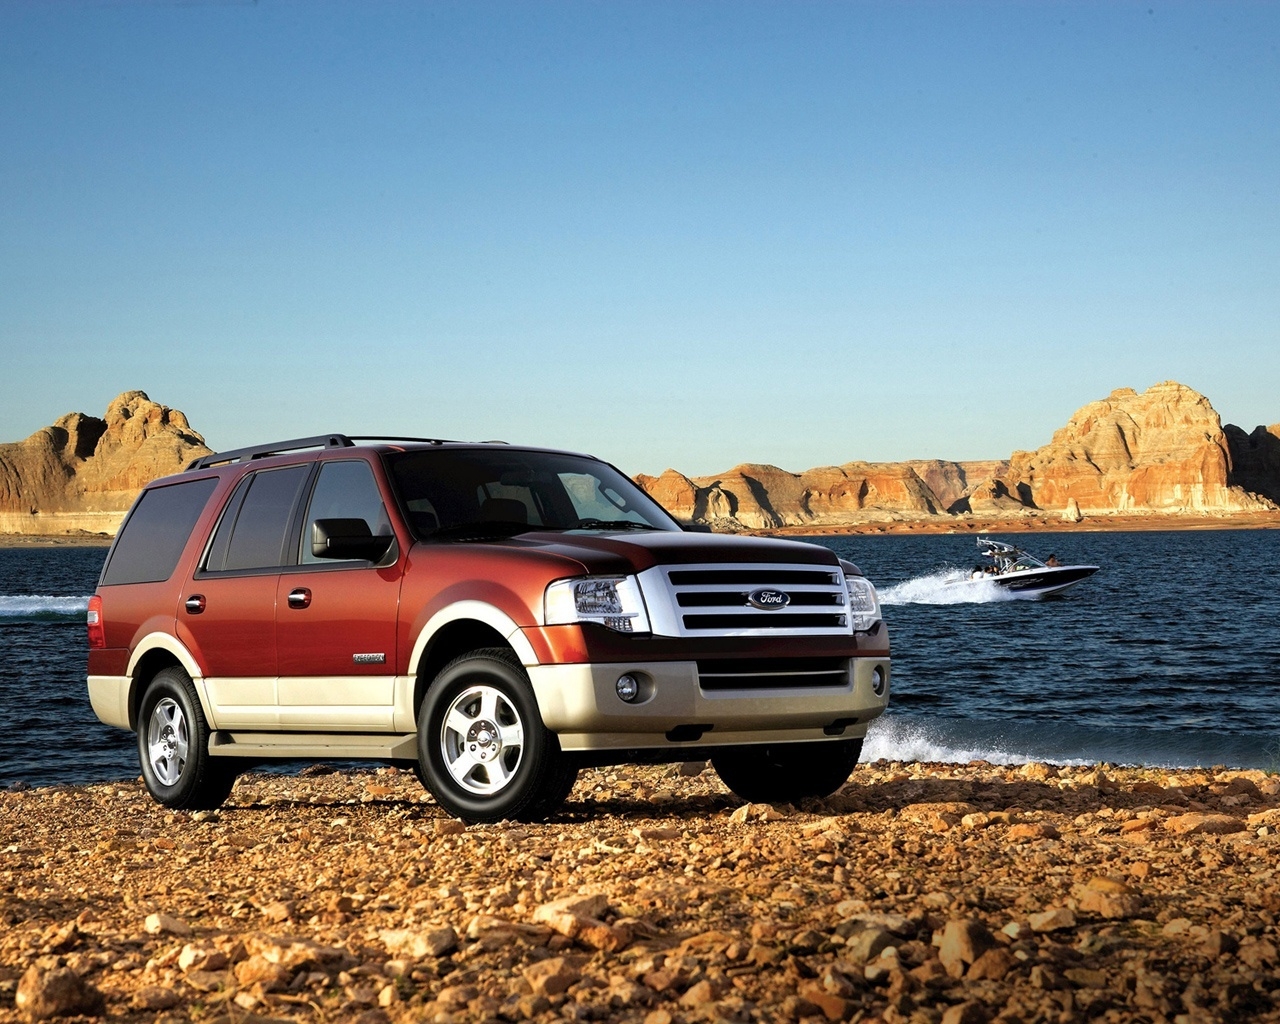 2010 Ford Expedition for 1280 x 1024 resolution